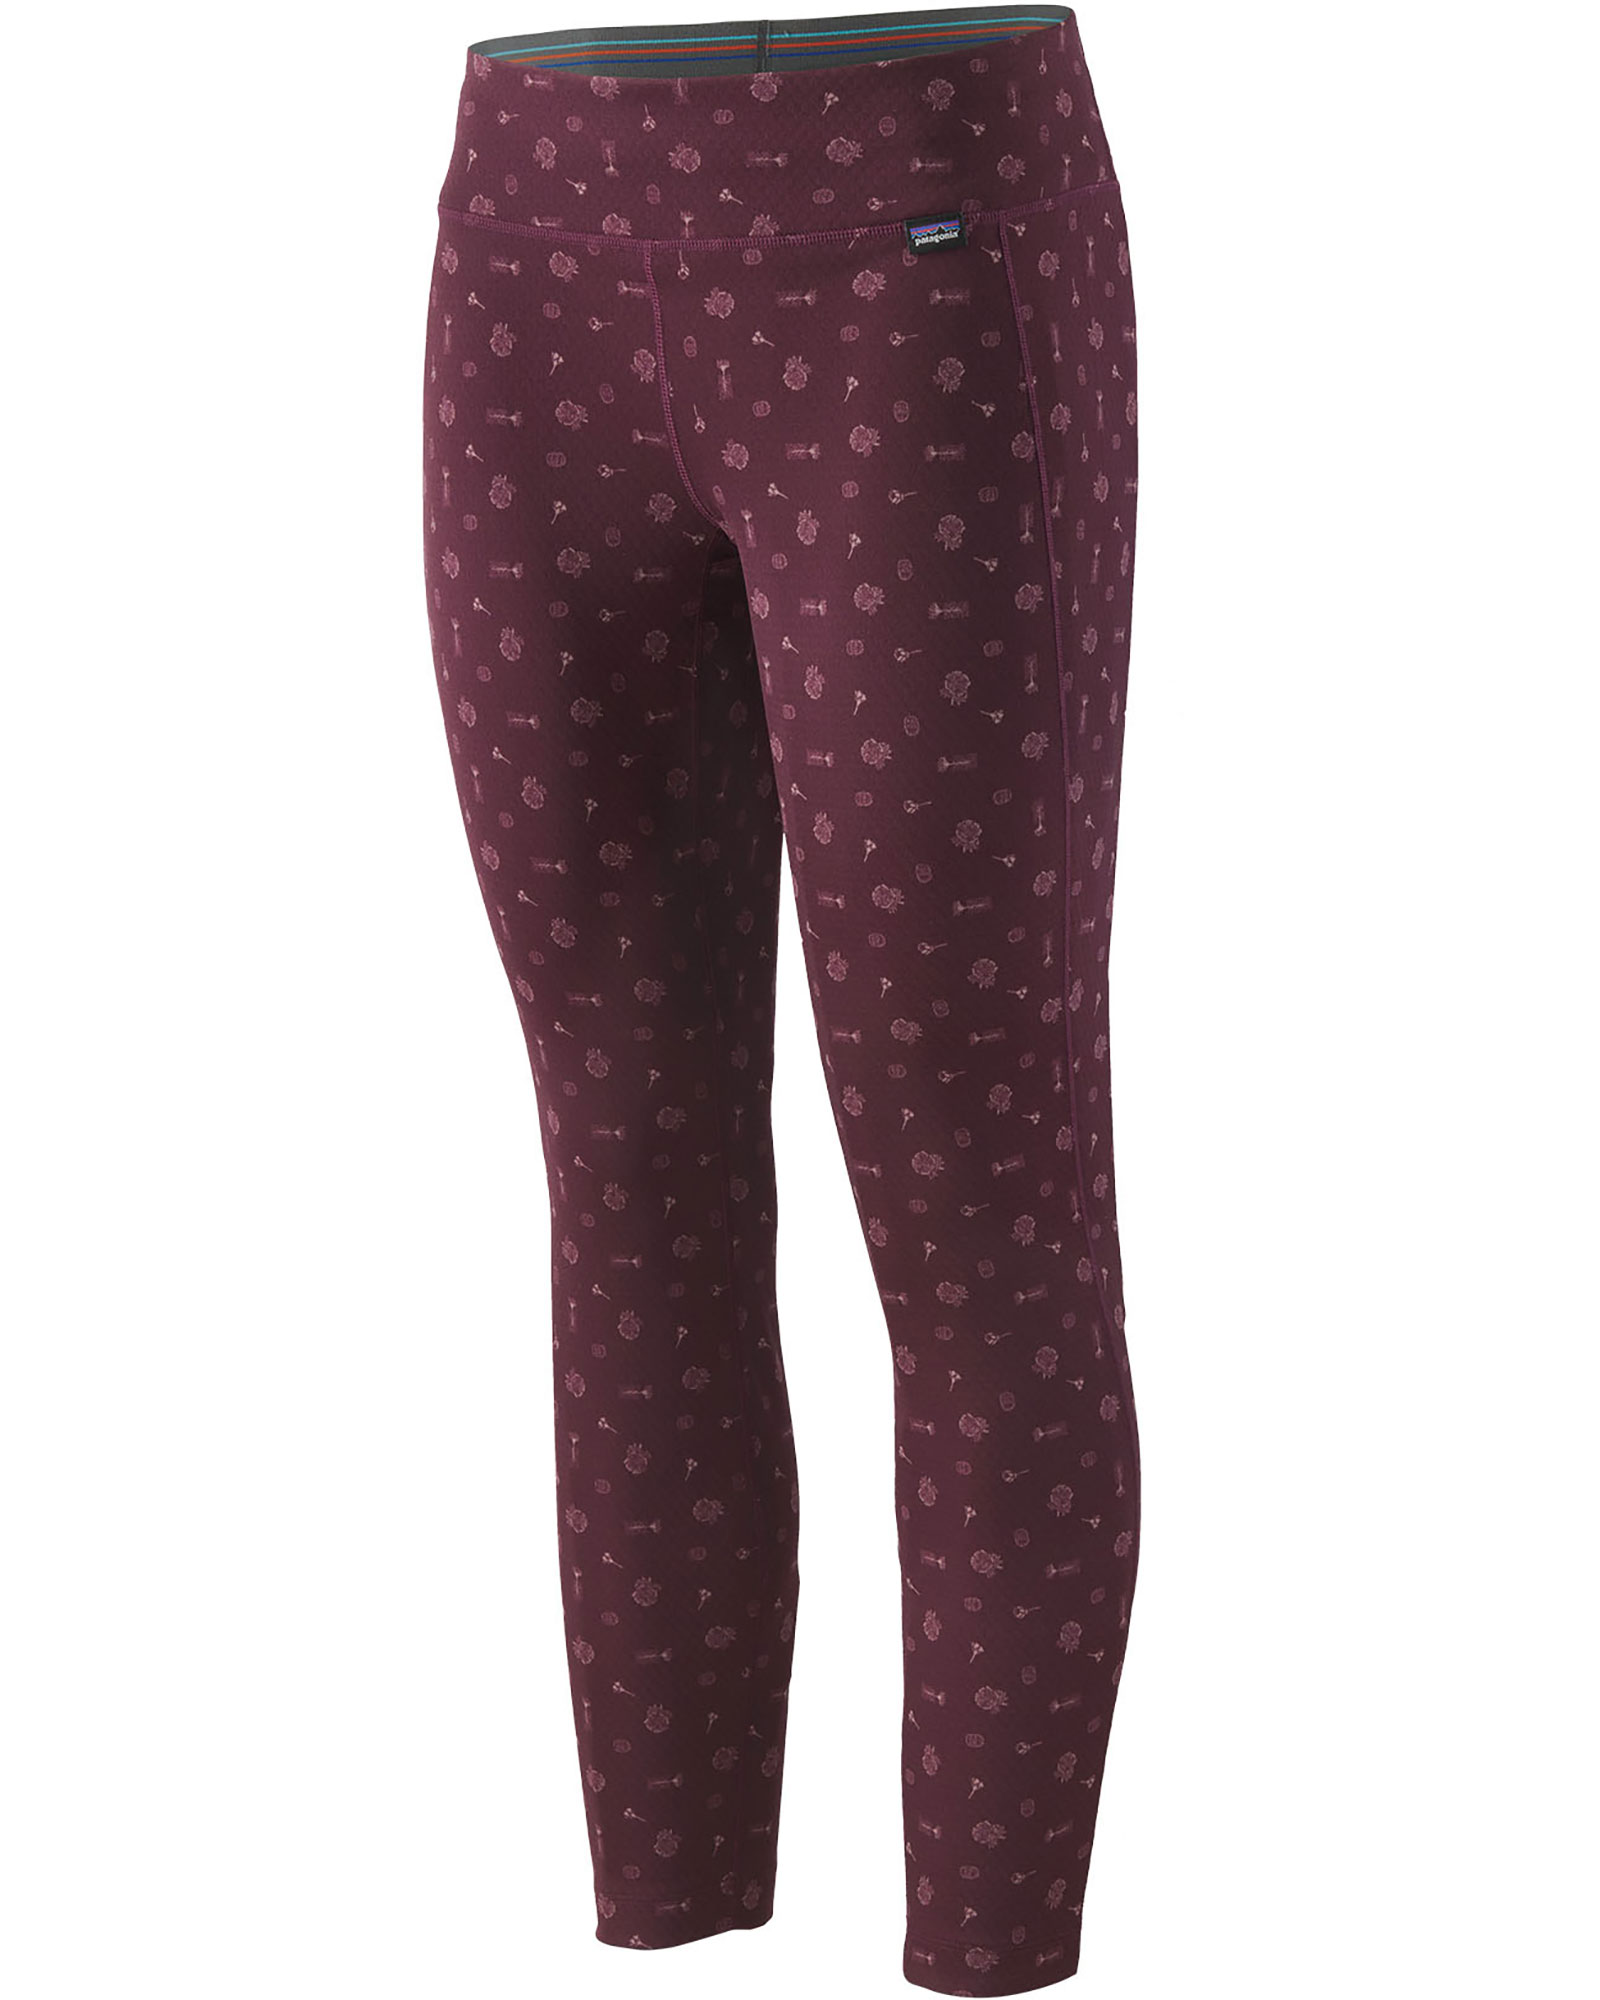 Patagonia Capilene Women’s Midweight Tights - Fire Floral: Night Plum S